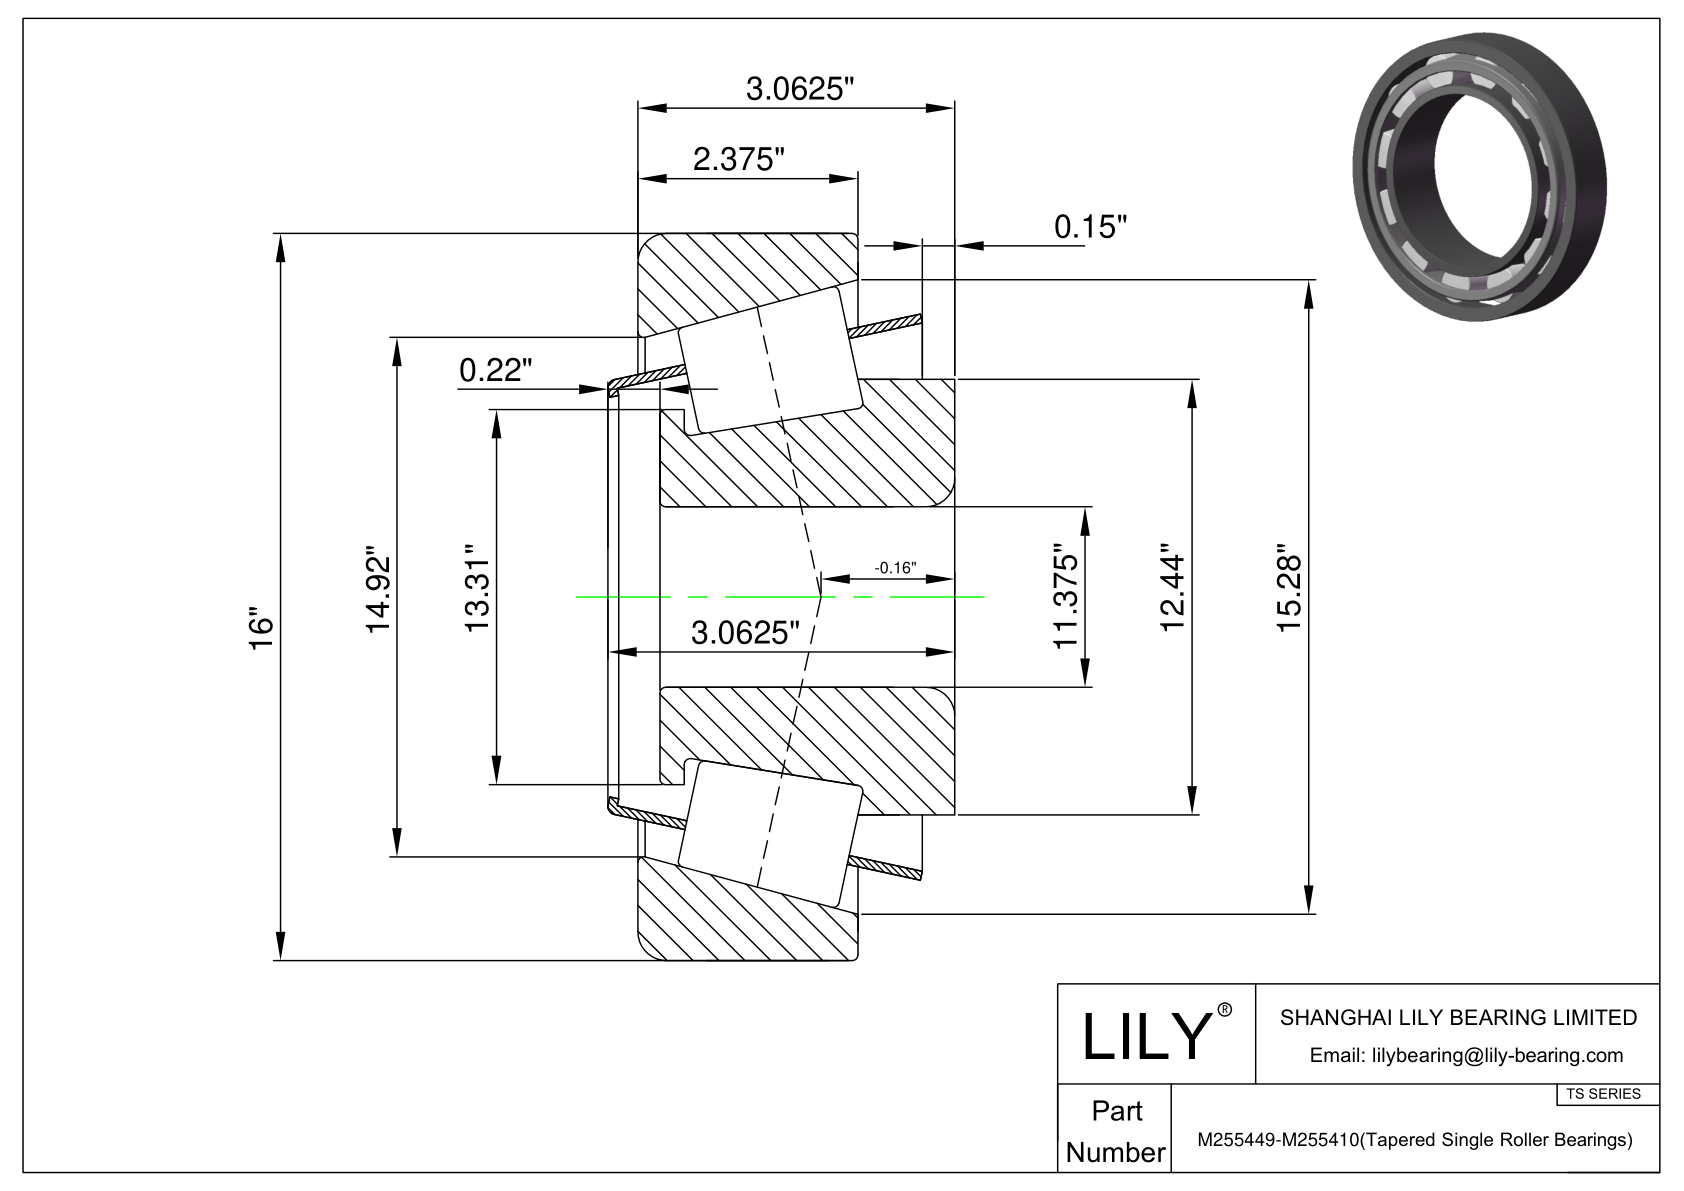 M255449-M255410 TS (Tapered Single Roller Bearings) (Imperial) cad drawing